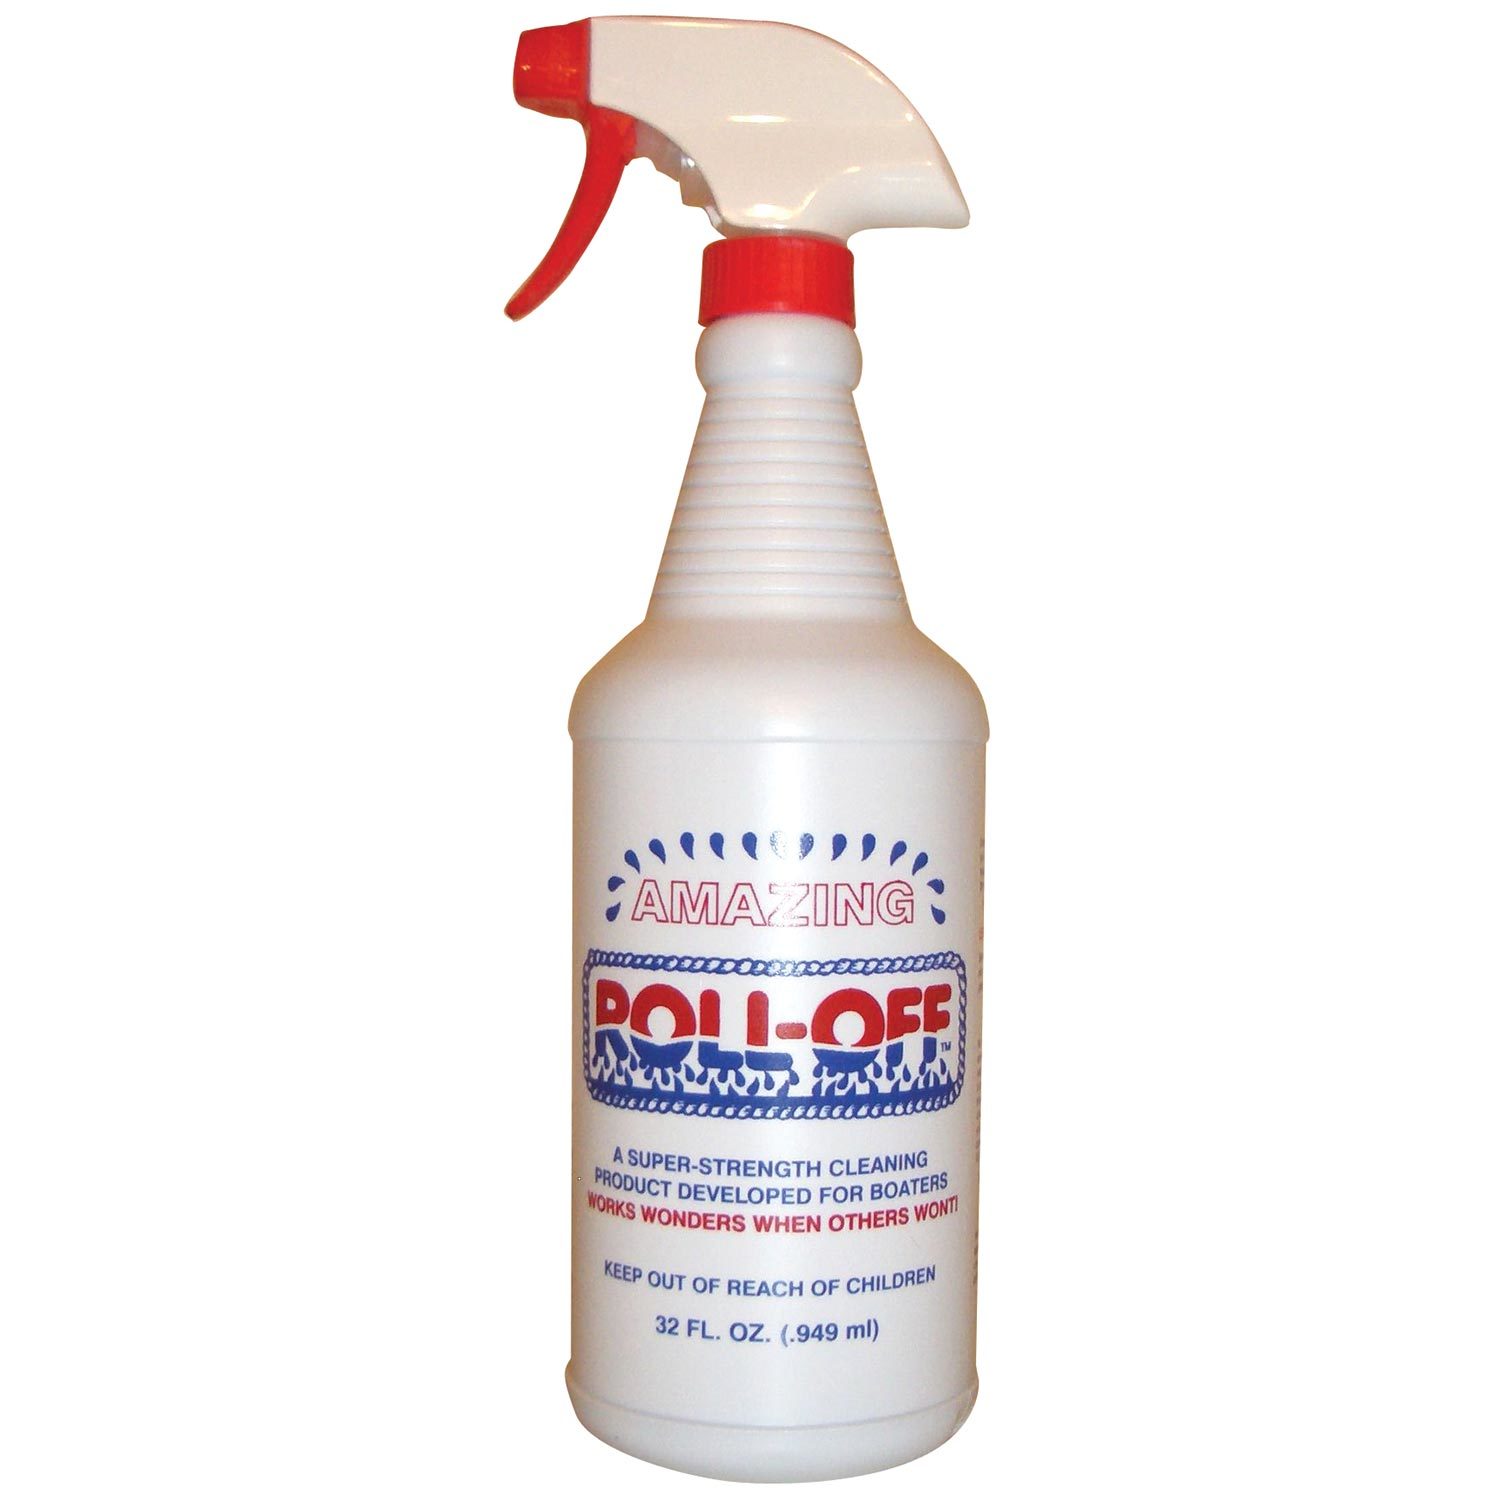 Boat Mold Remover and Wax Remover